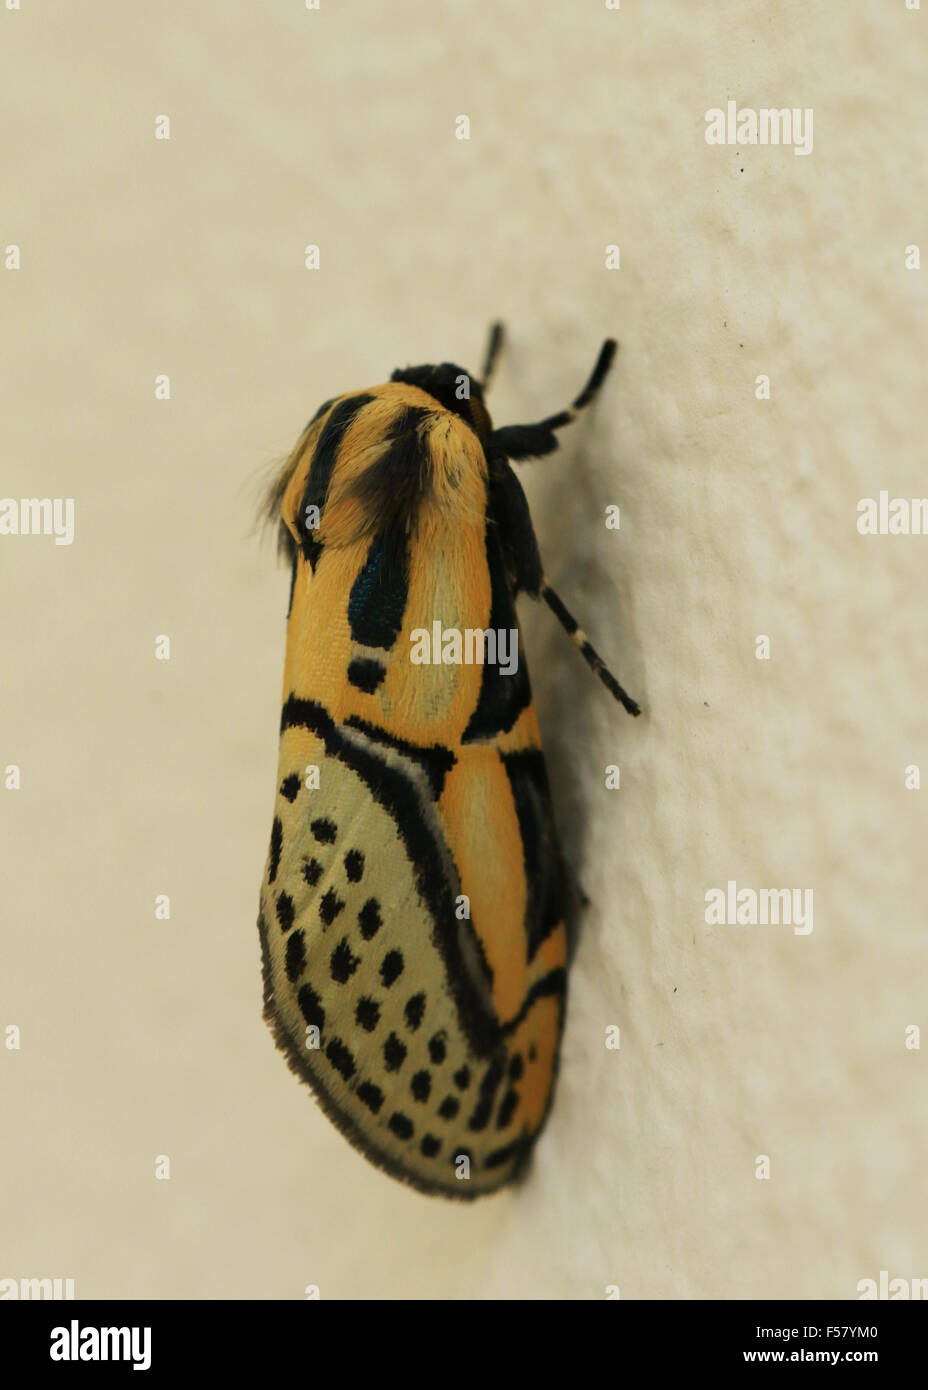 Yellow and black hieroglyphic moth, or Lepidoptera, found in Guanacaste, Costa Rica Stock Photo